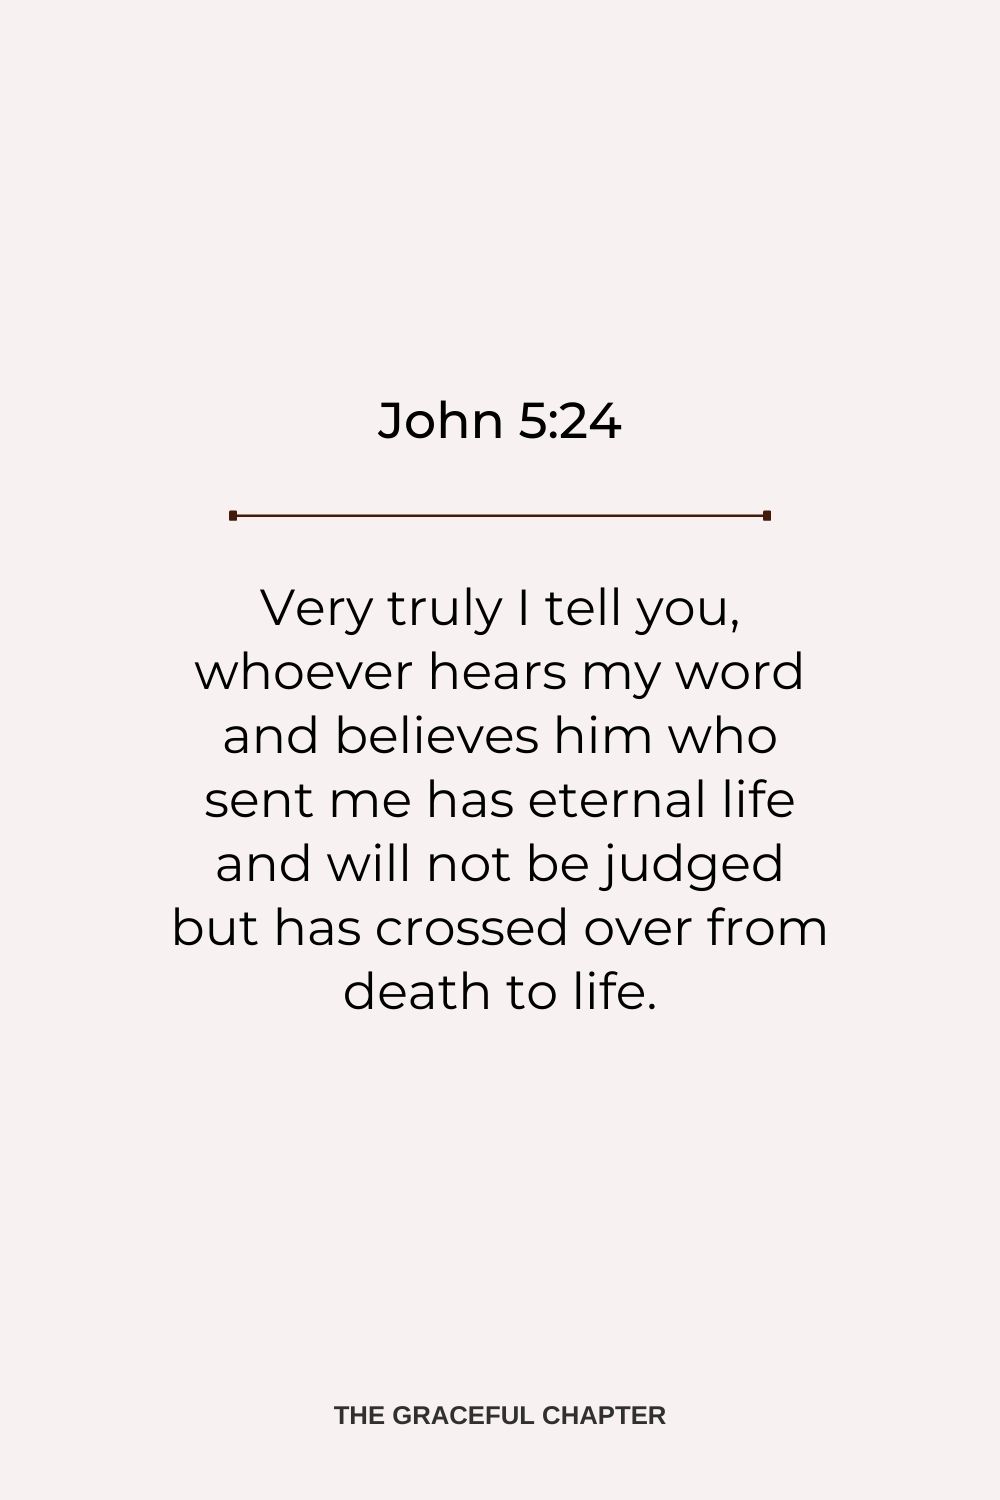 Very truly I tell you, whoever hears my word and believes him who sent me has eternal life and will not be judged but has crossed over from death to life. John 5:24